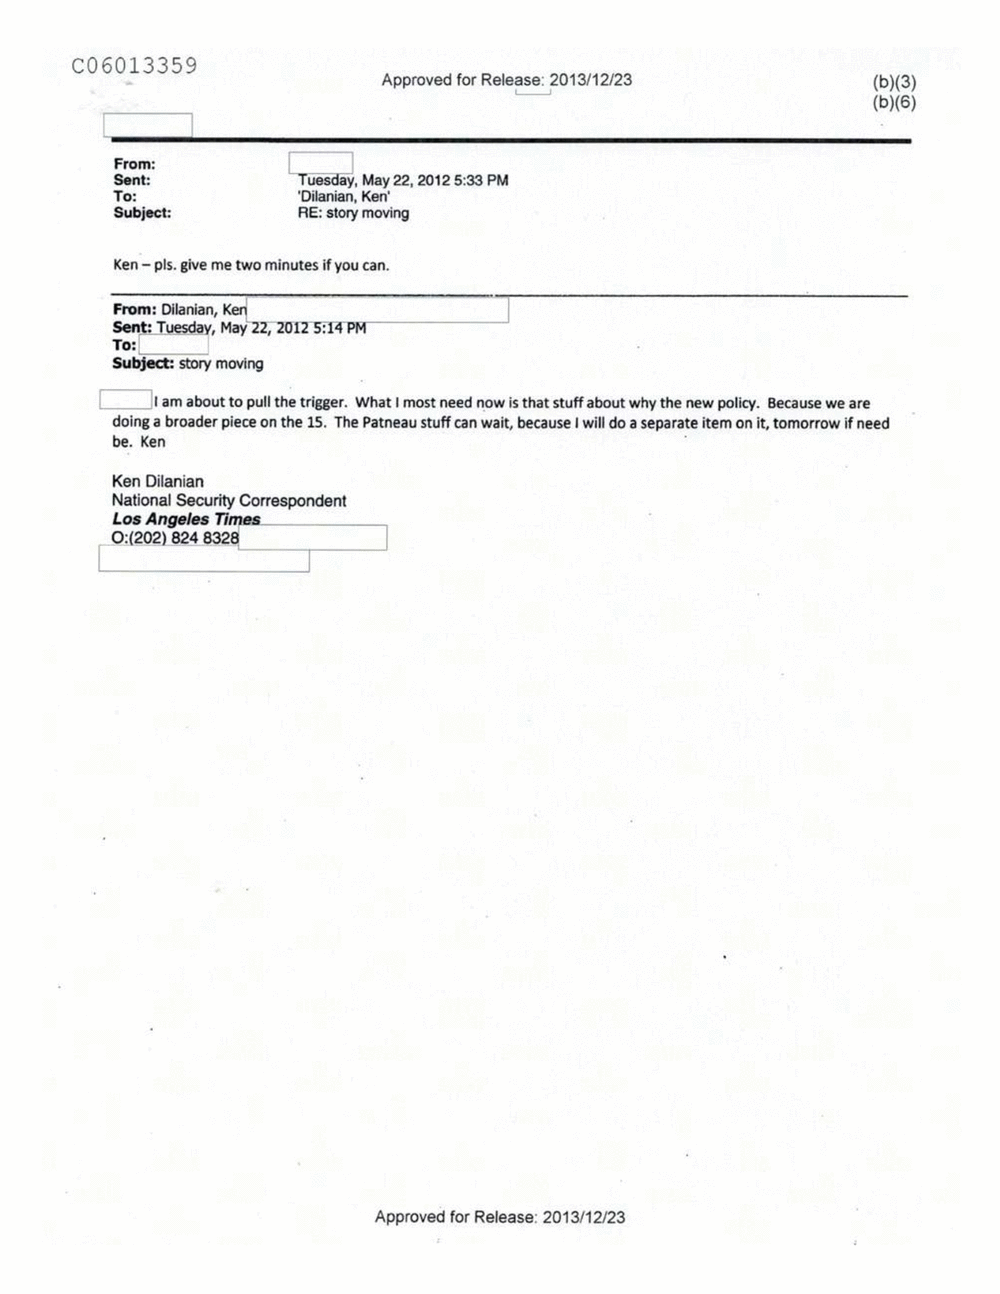 Page 282 from Email Correspondence Between Reporters and CIA Flacks